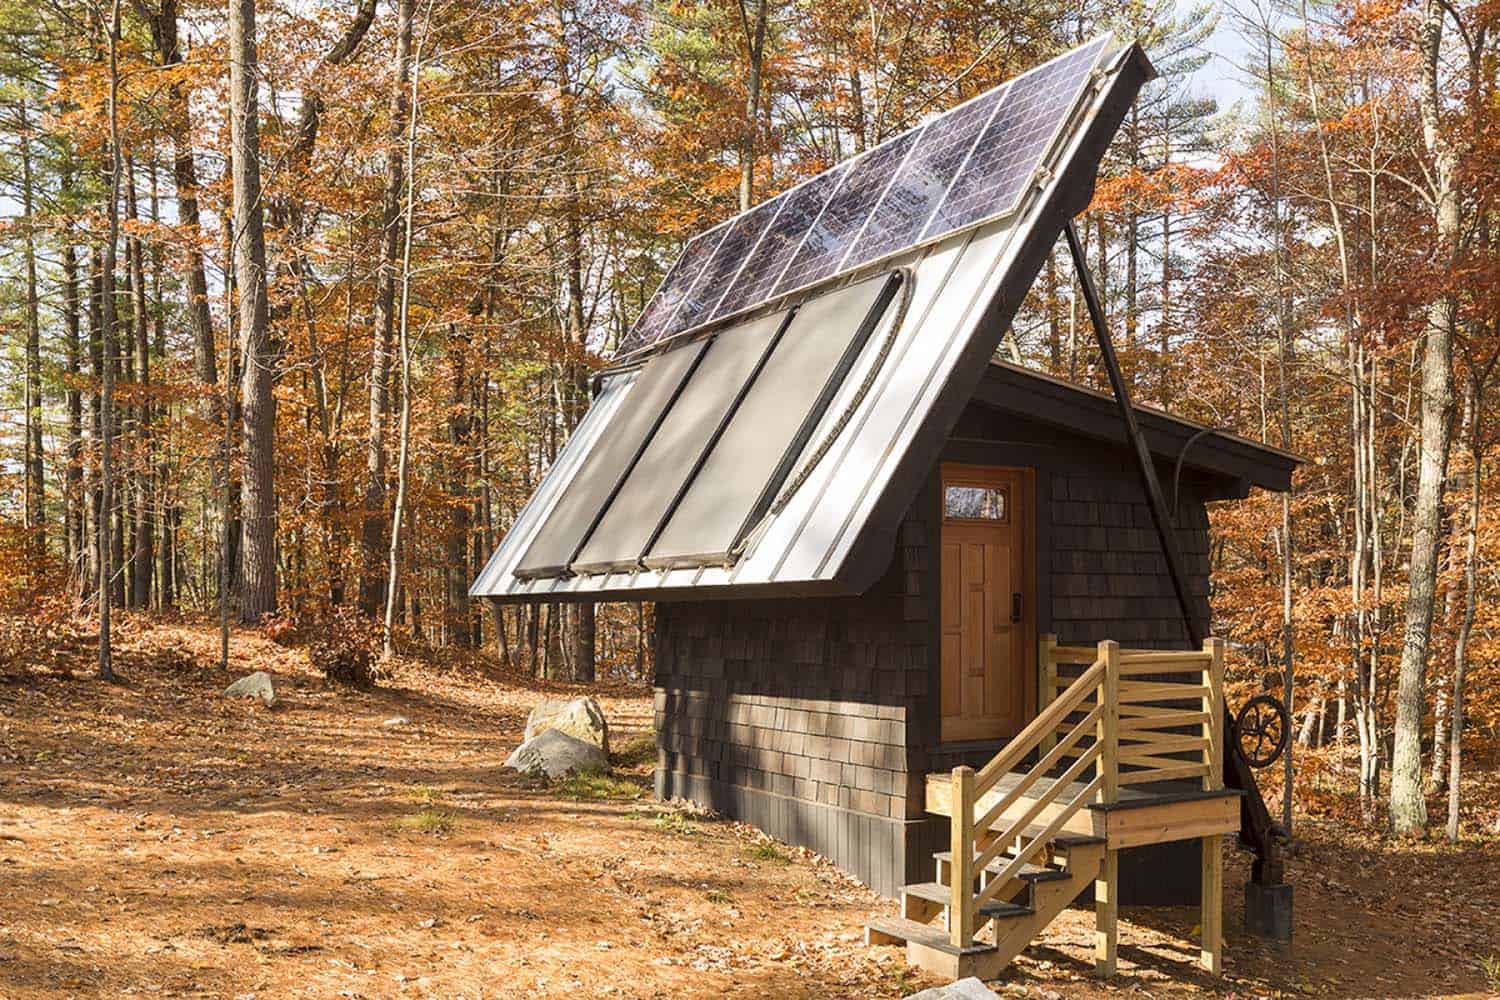 off-the-grid island camp exterior with a solar panel